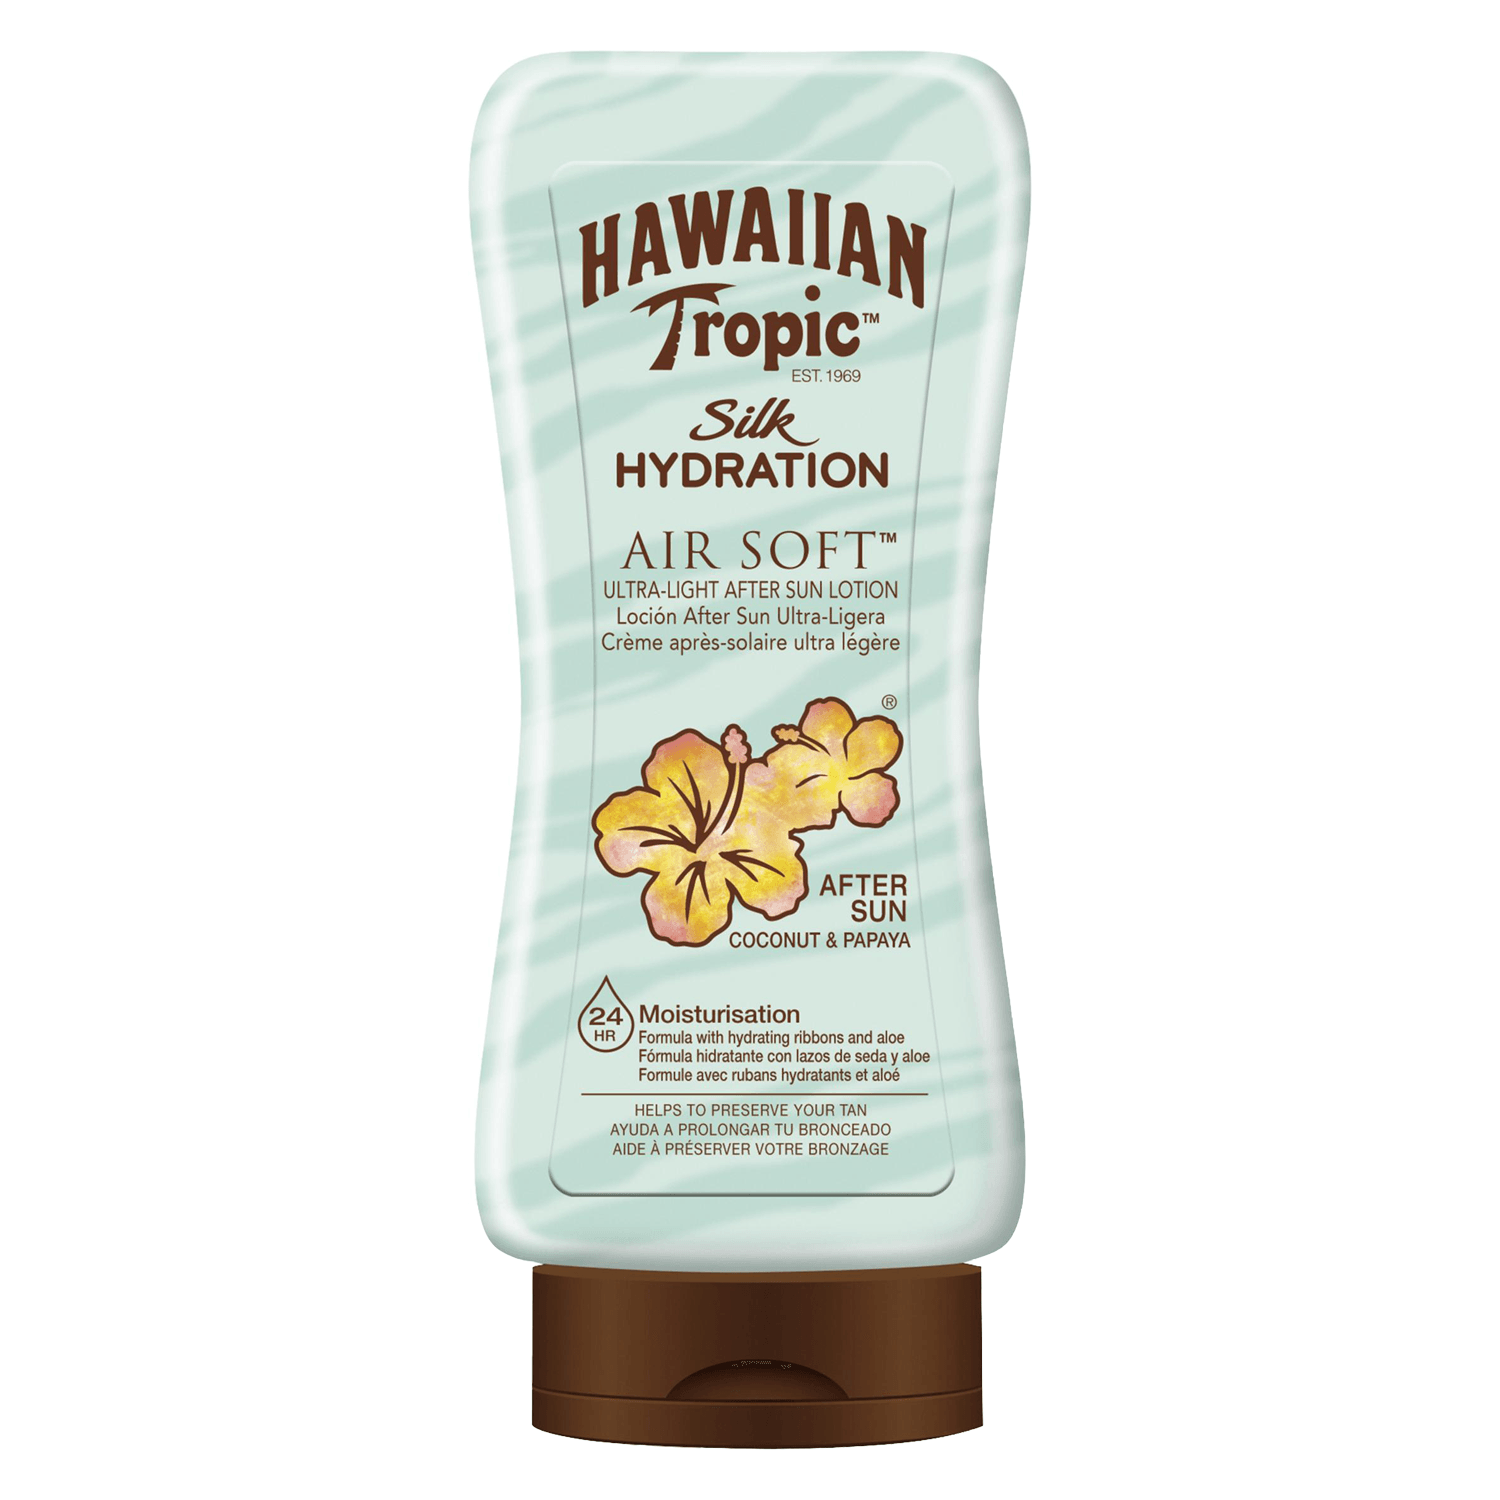 Product image from Hawaiian Tropic - Silk Hydration Aftersun Lotion